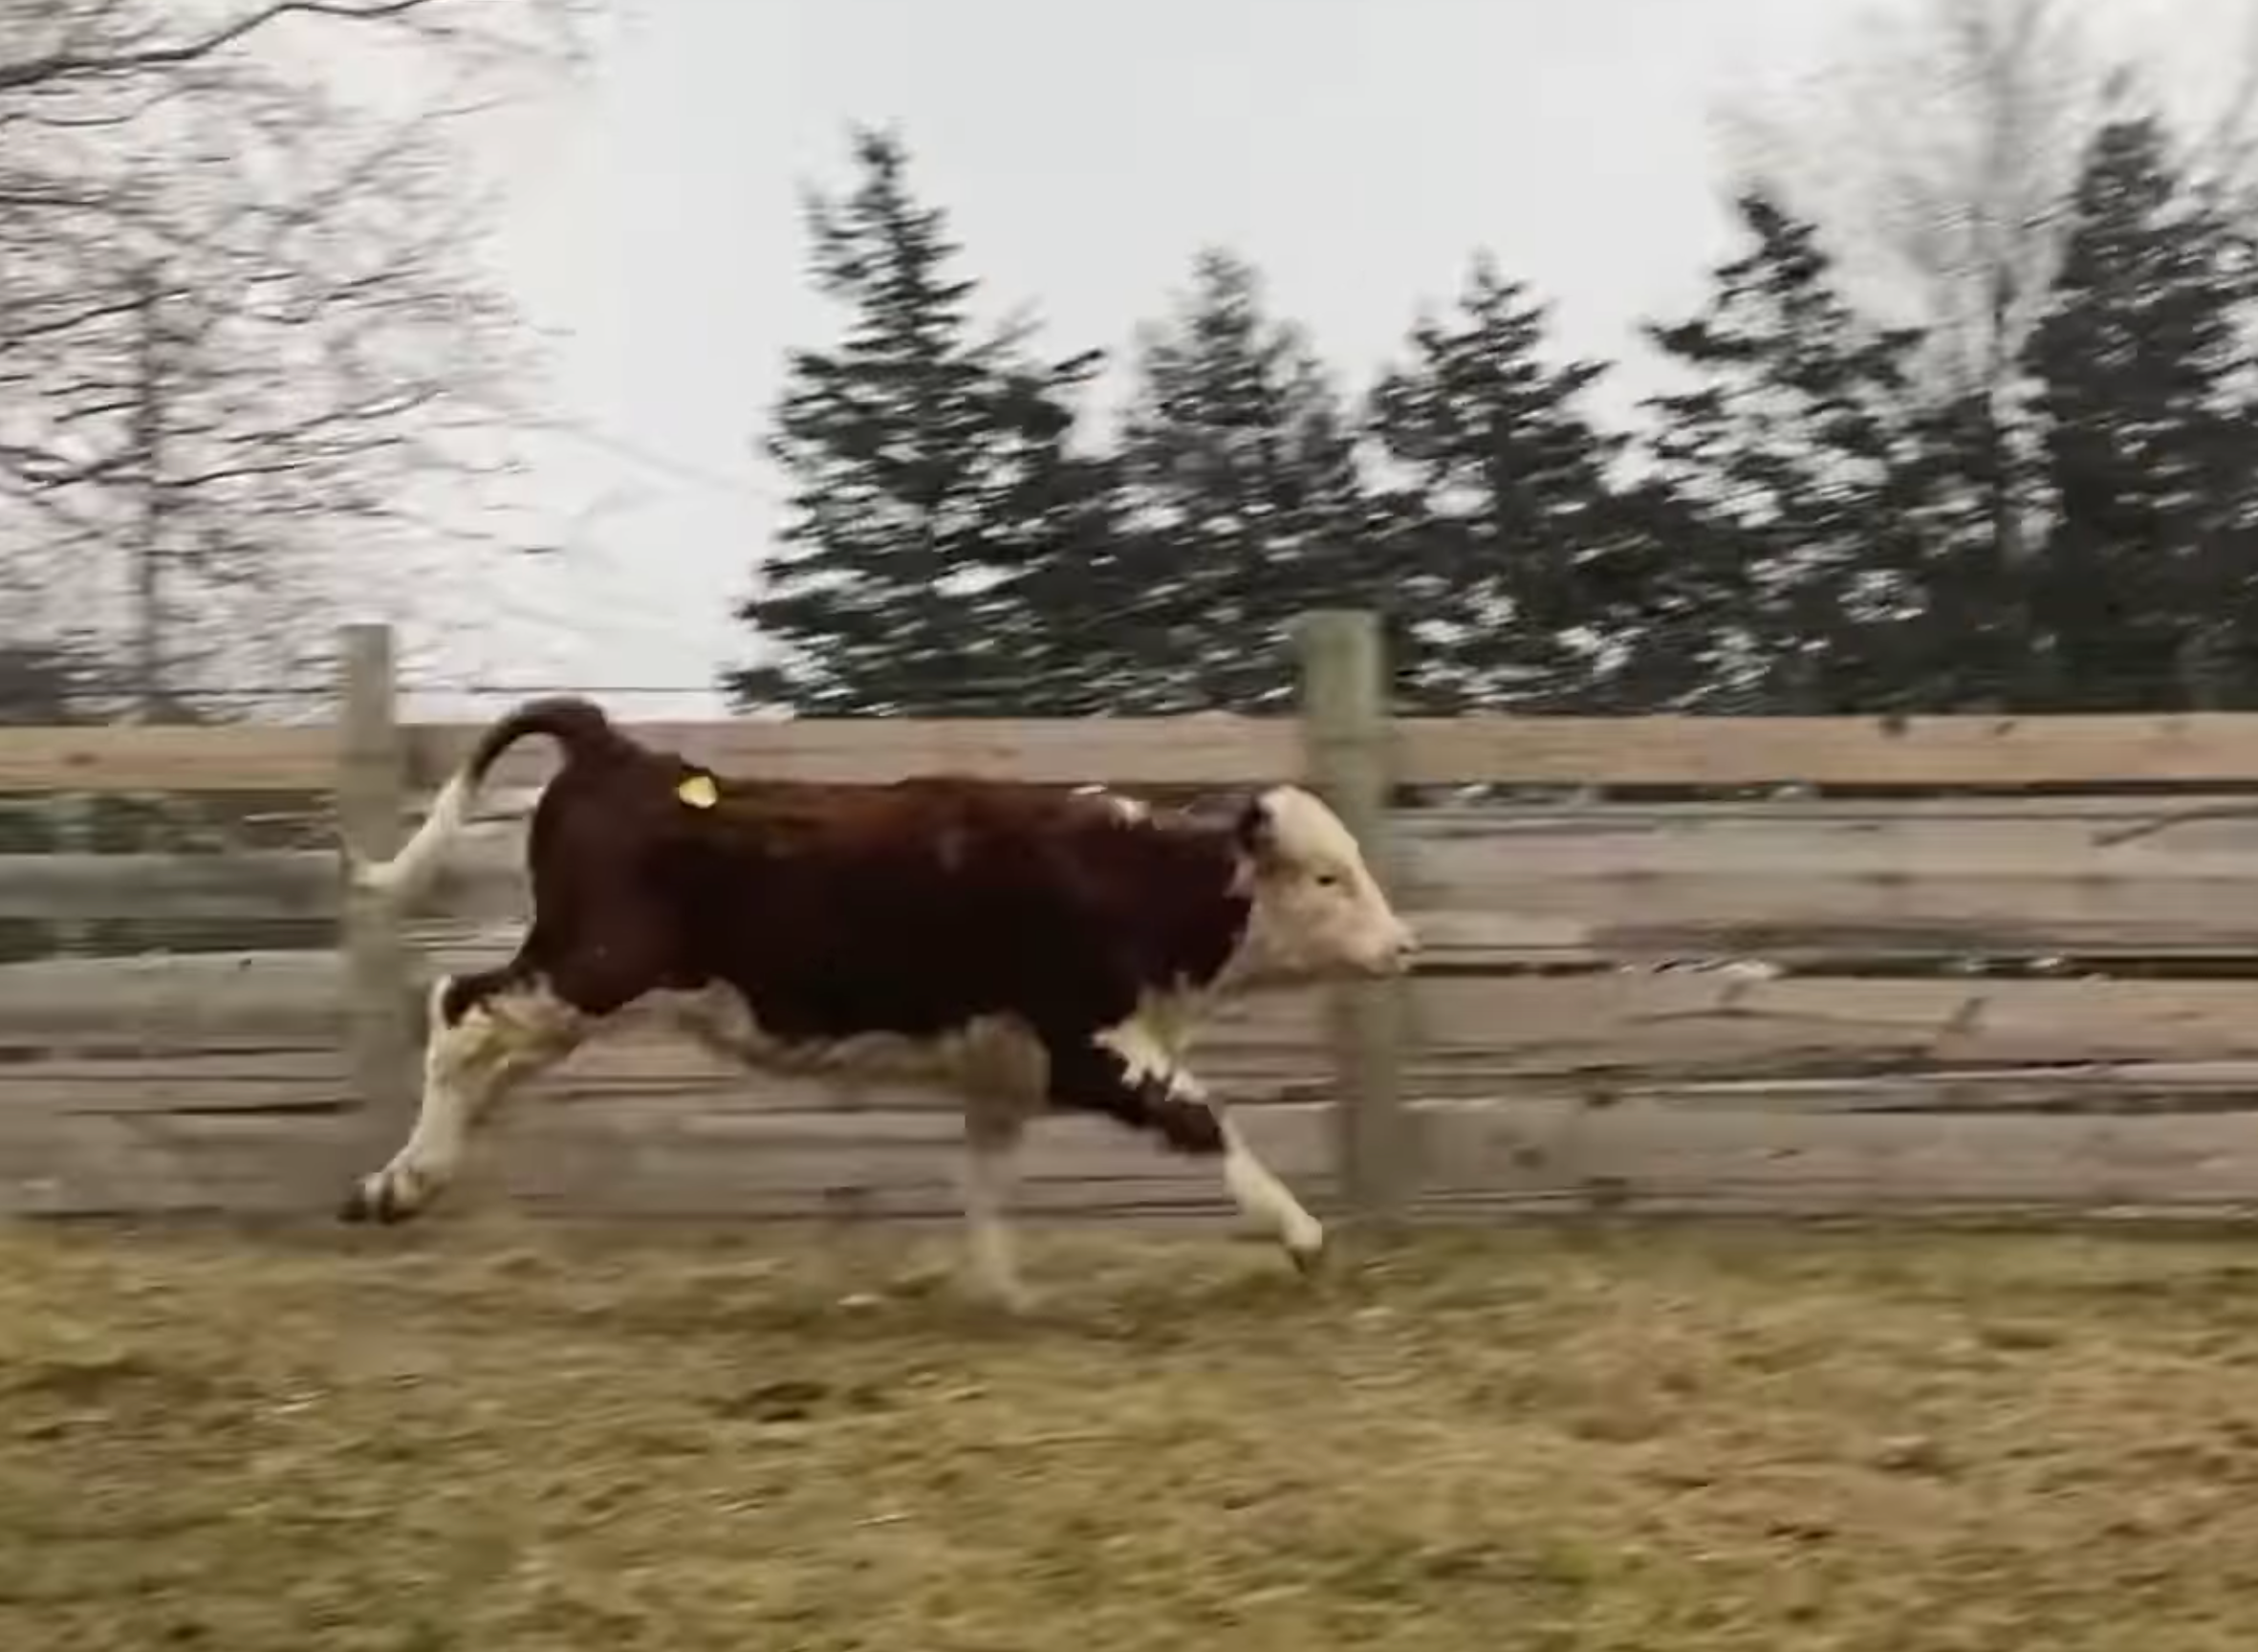 Stacy the cow enjoys her new life at Skylands Animal Sanctuary and Rescue